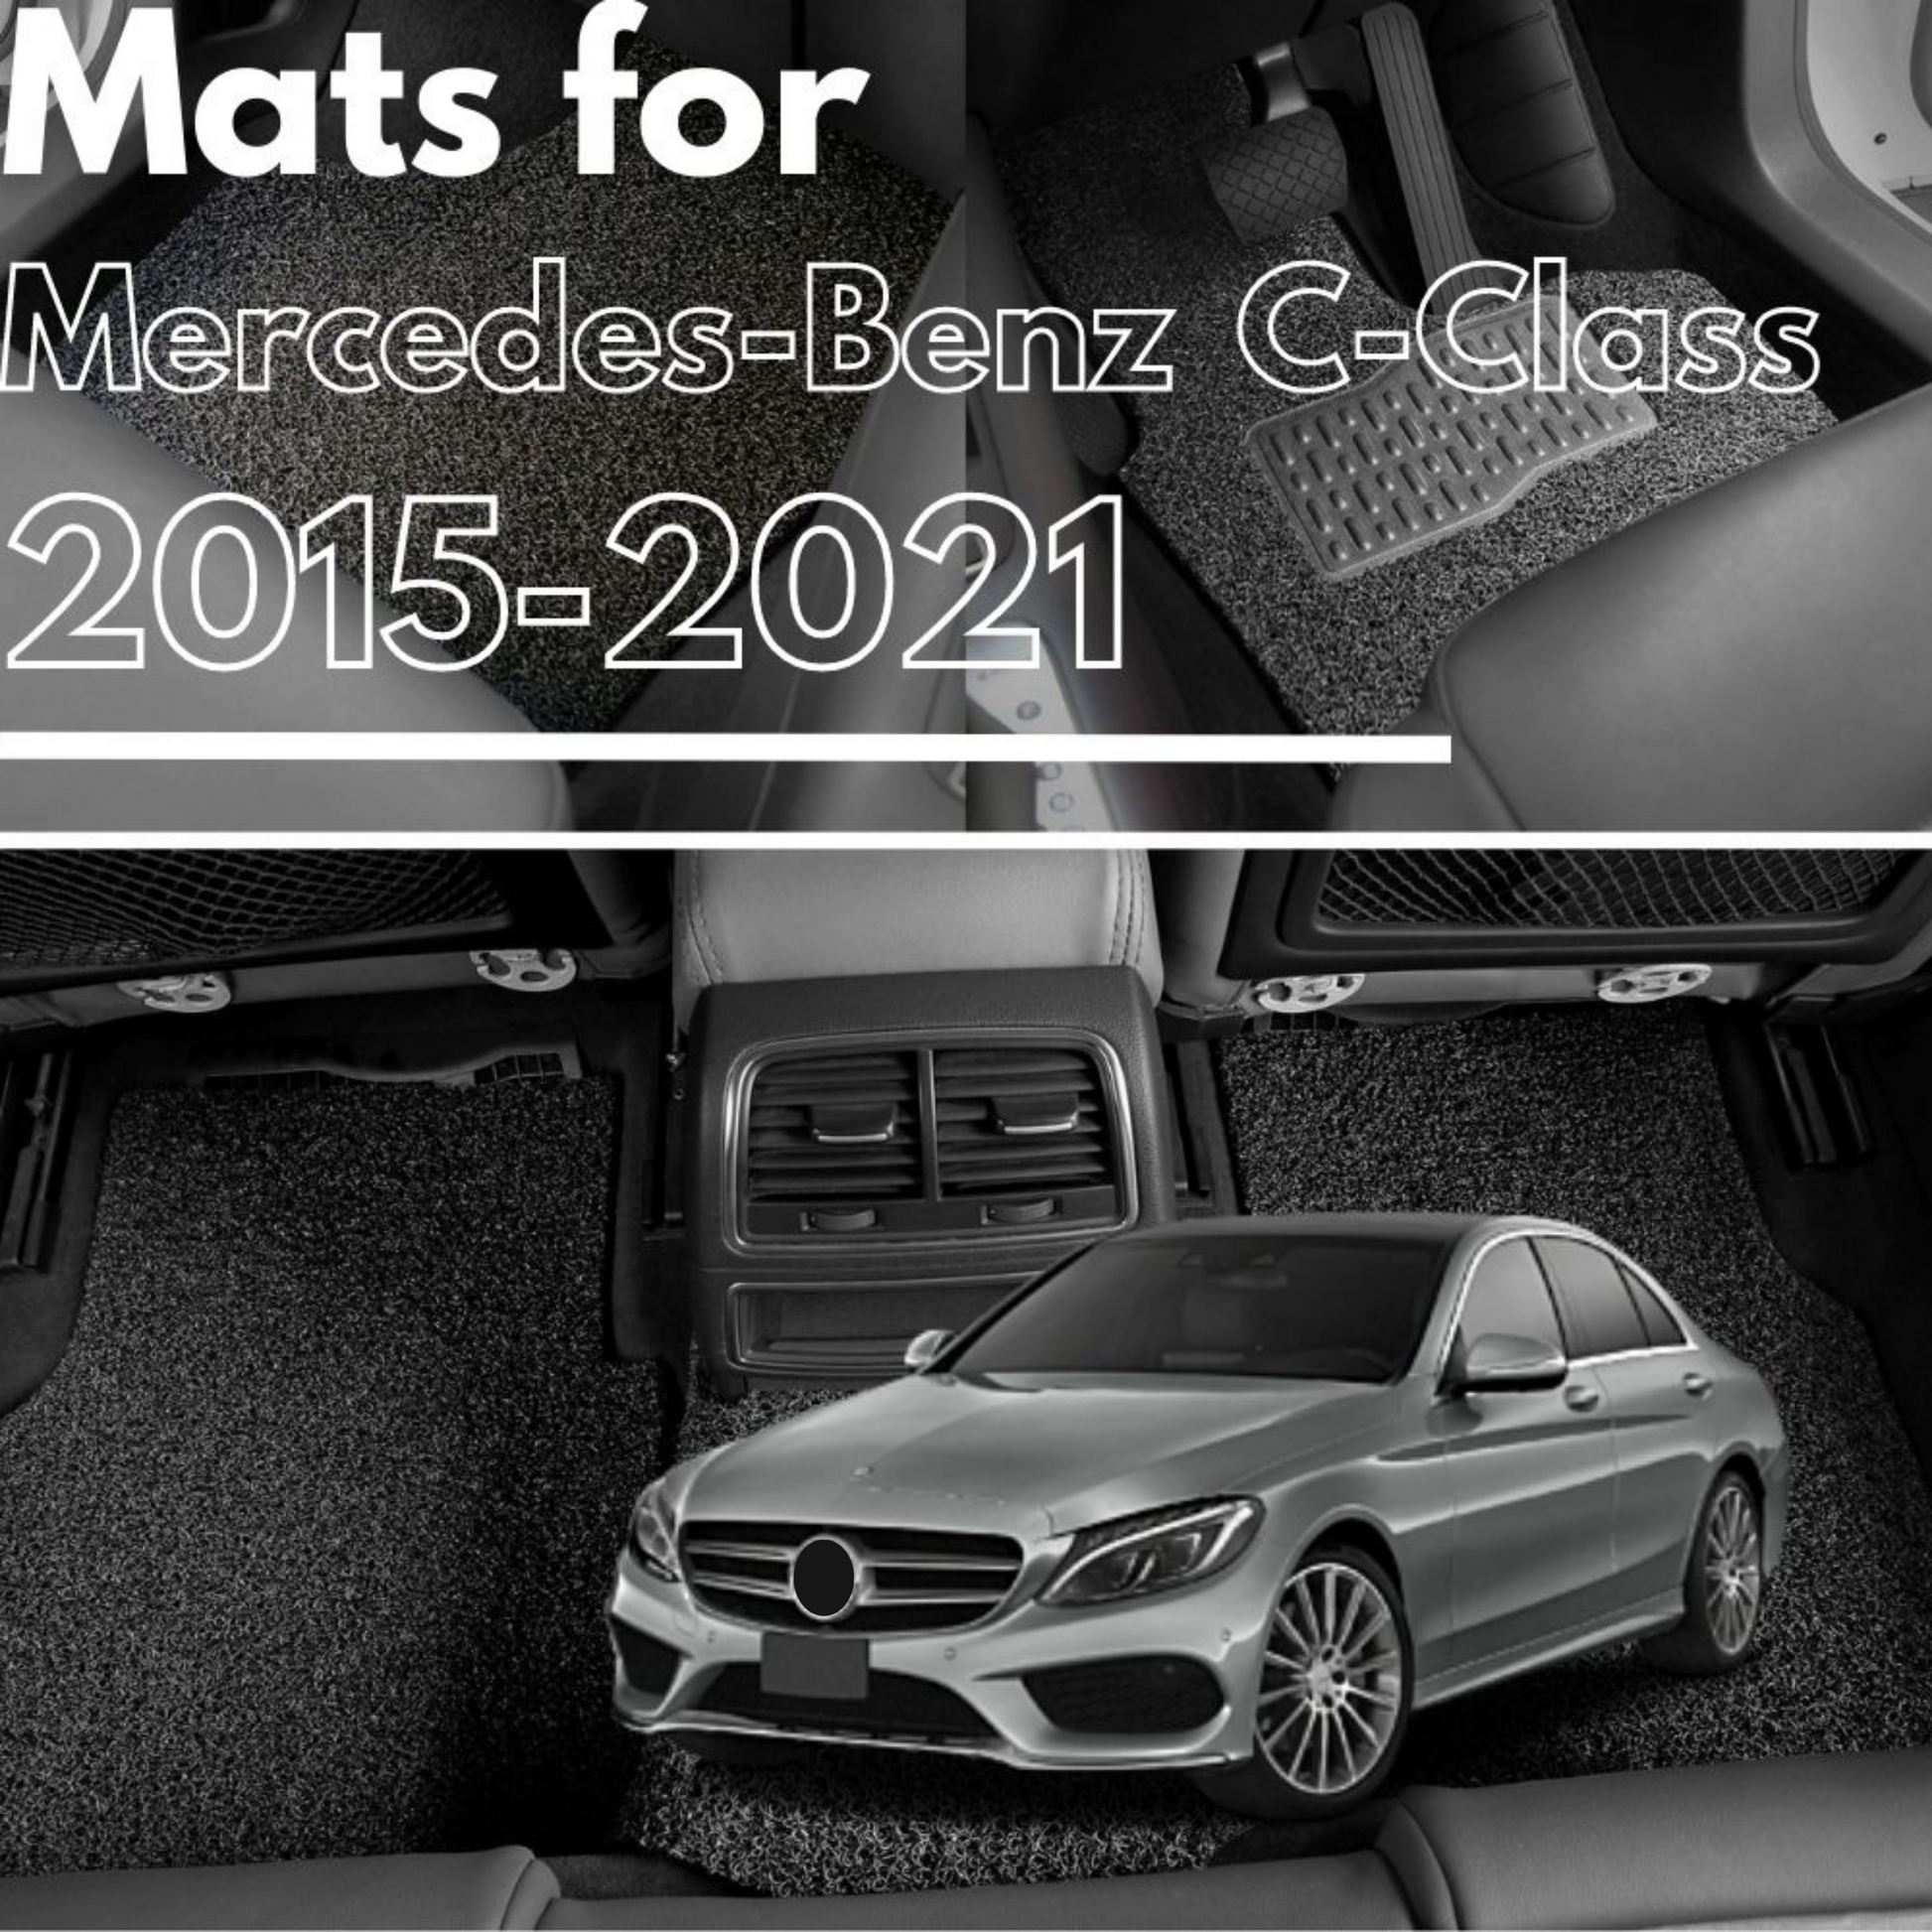 New Mercedes-Benz C-Class W206 cars for sale in Australia 